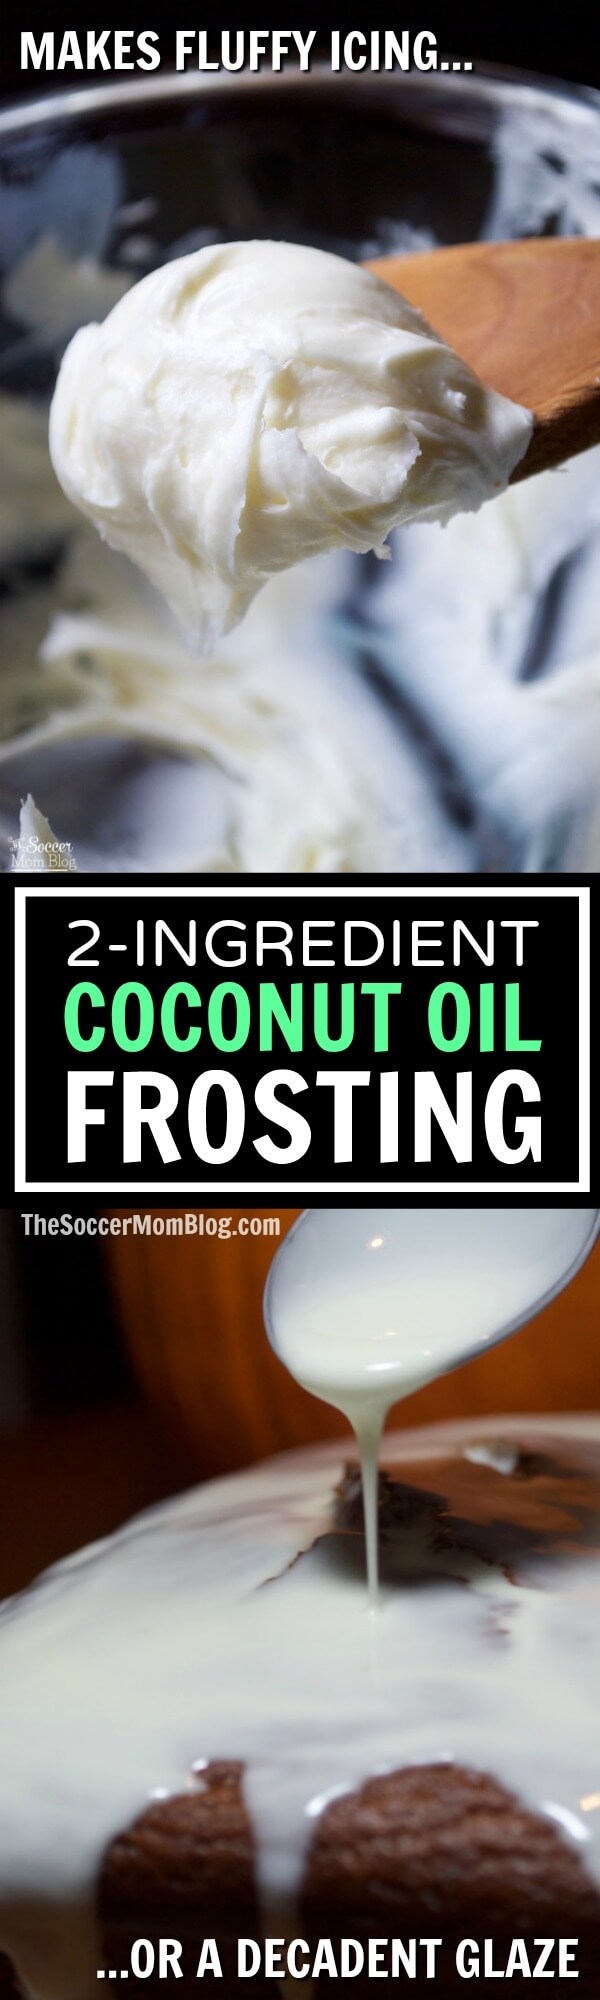 It really is like magic! ONE coconut oil frosting recipe creates two completely different types of frosting! Super EASY 2-ingredient recipe can be made with white or dark chocolate!